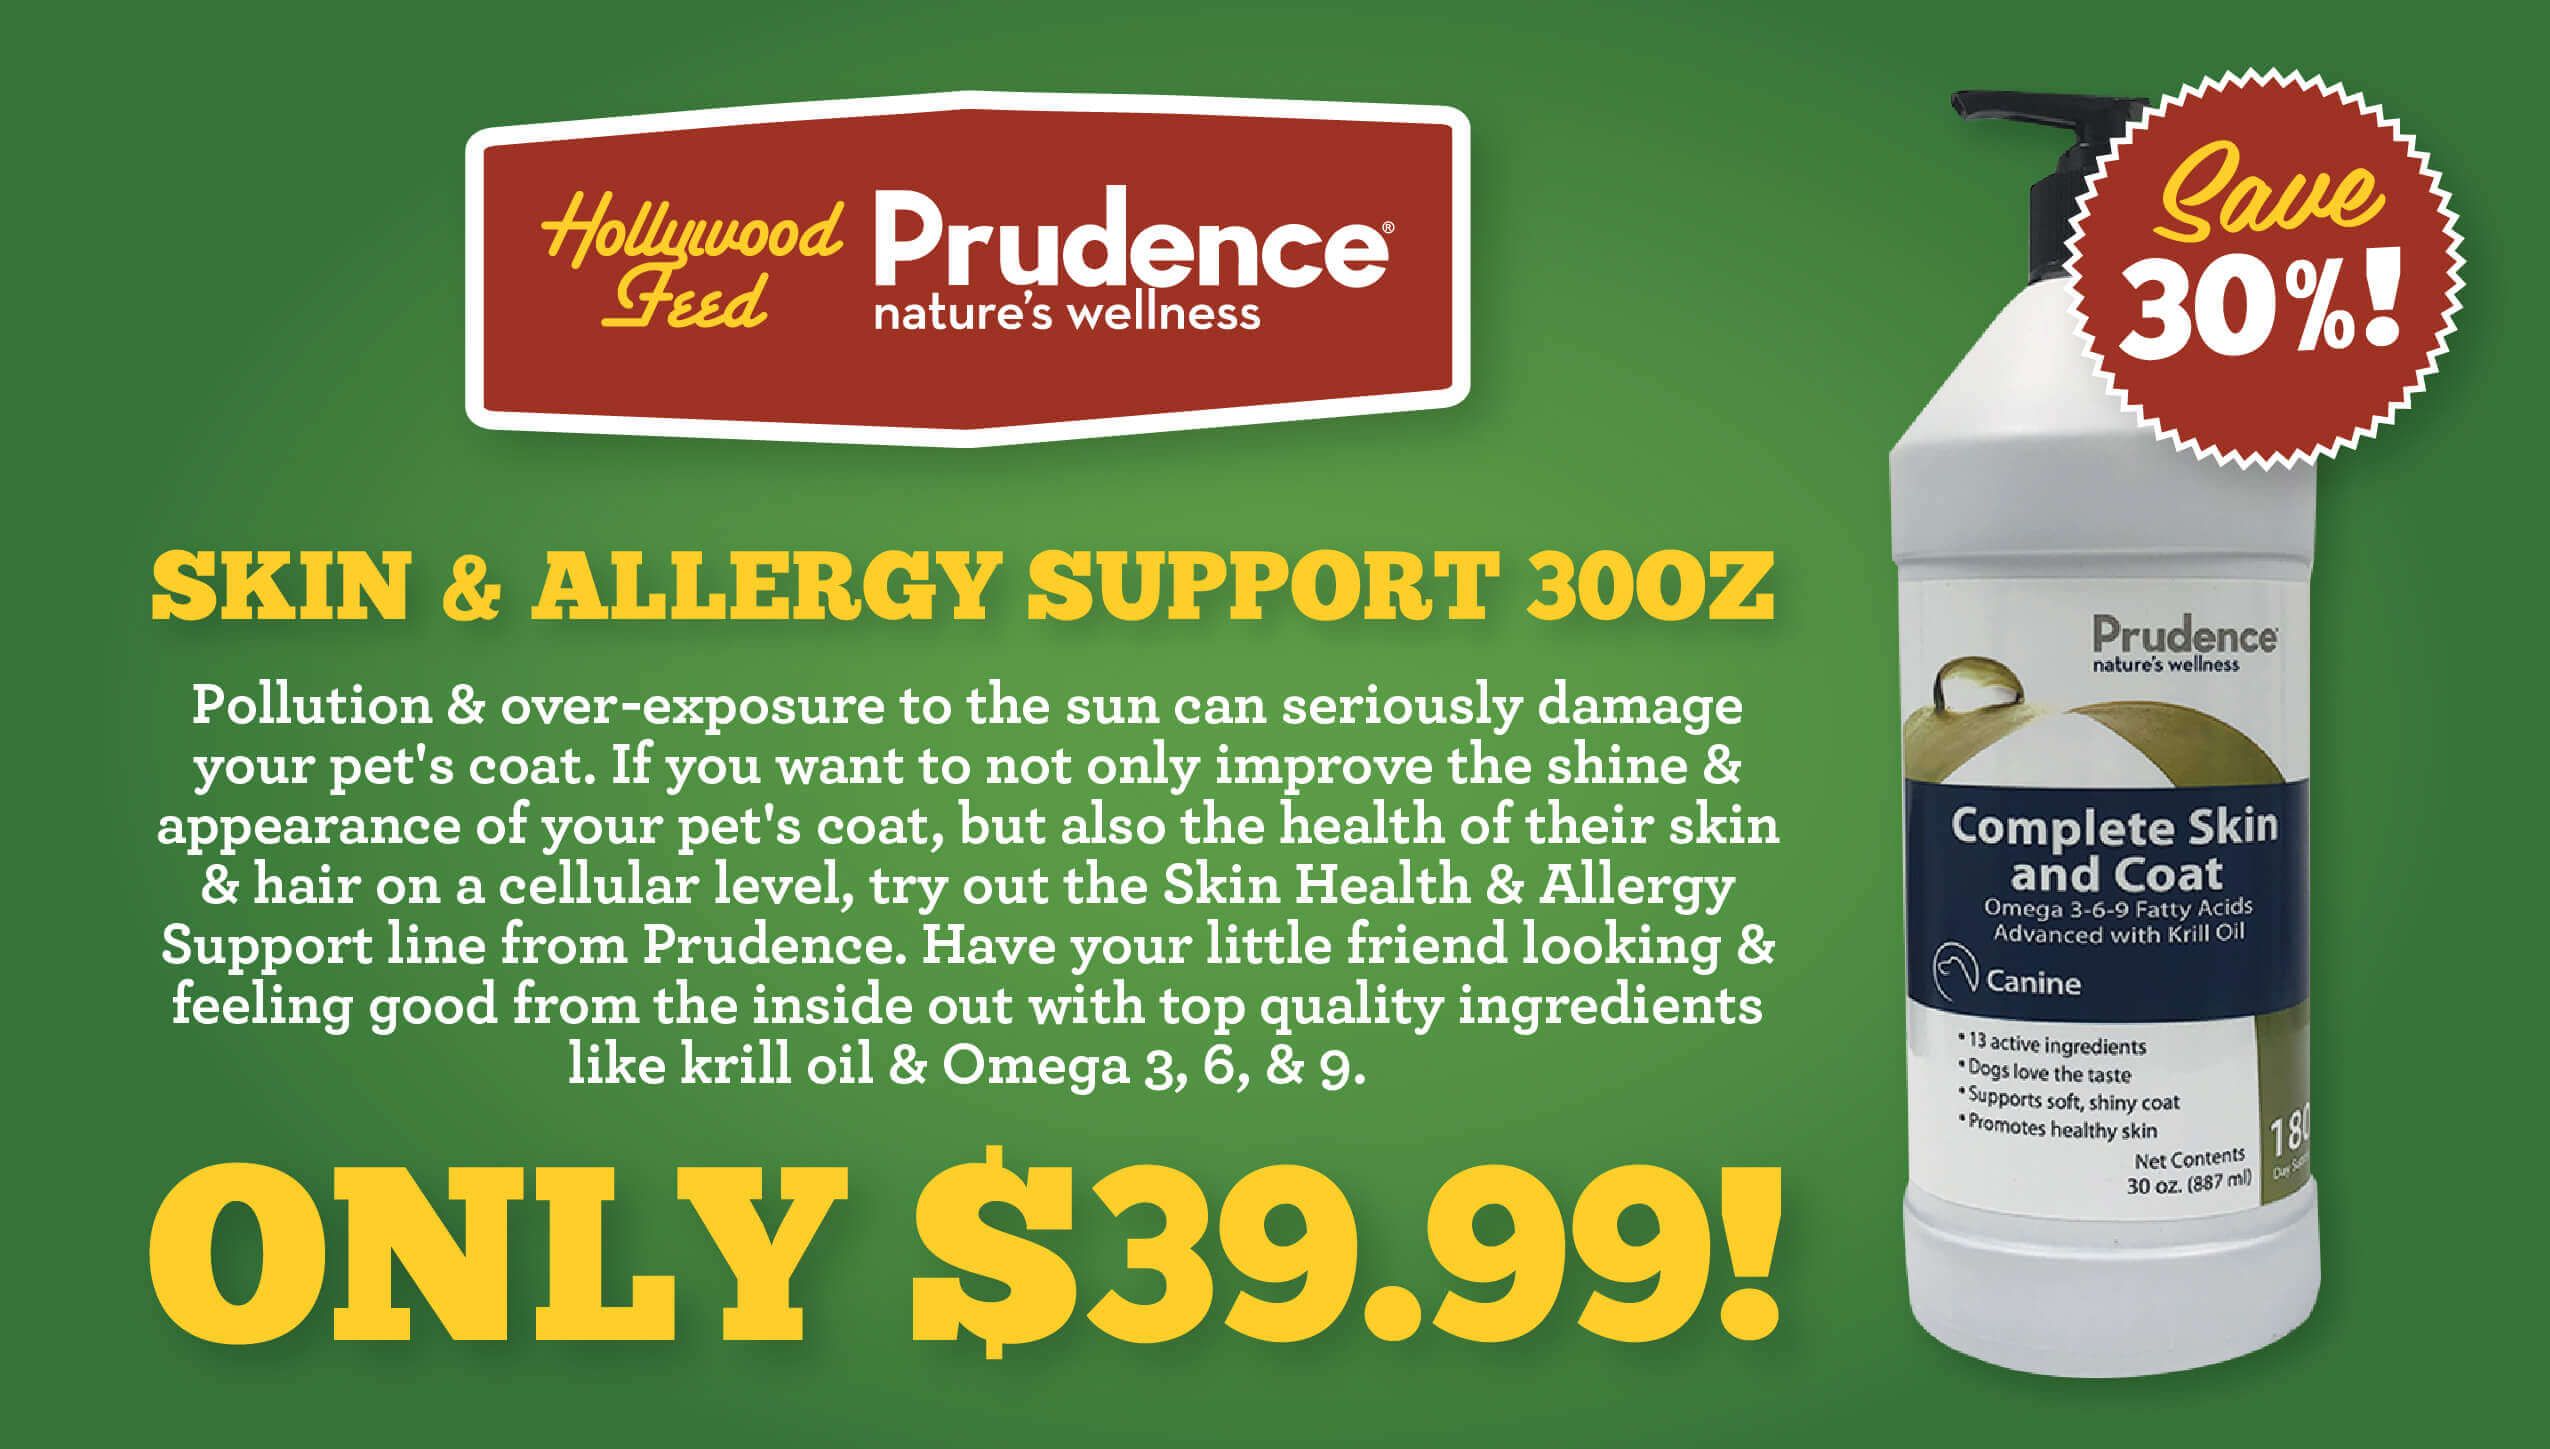 Only $39.99!  Prudence Skin & Allergy Support 30oz